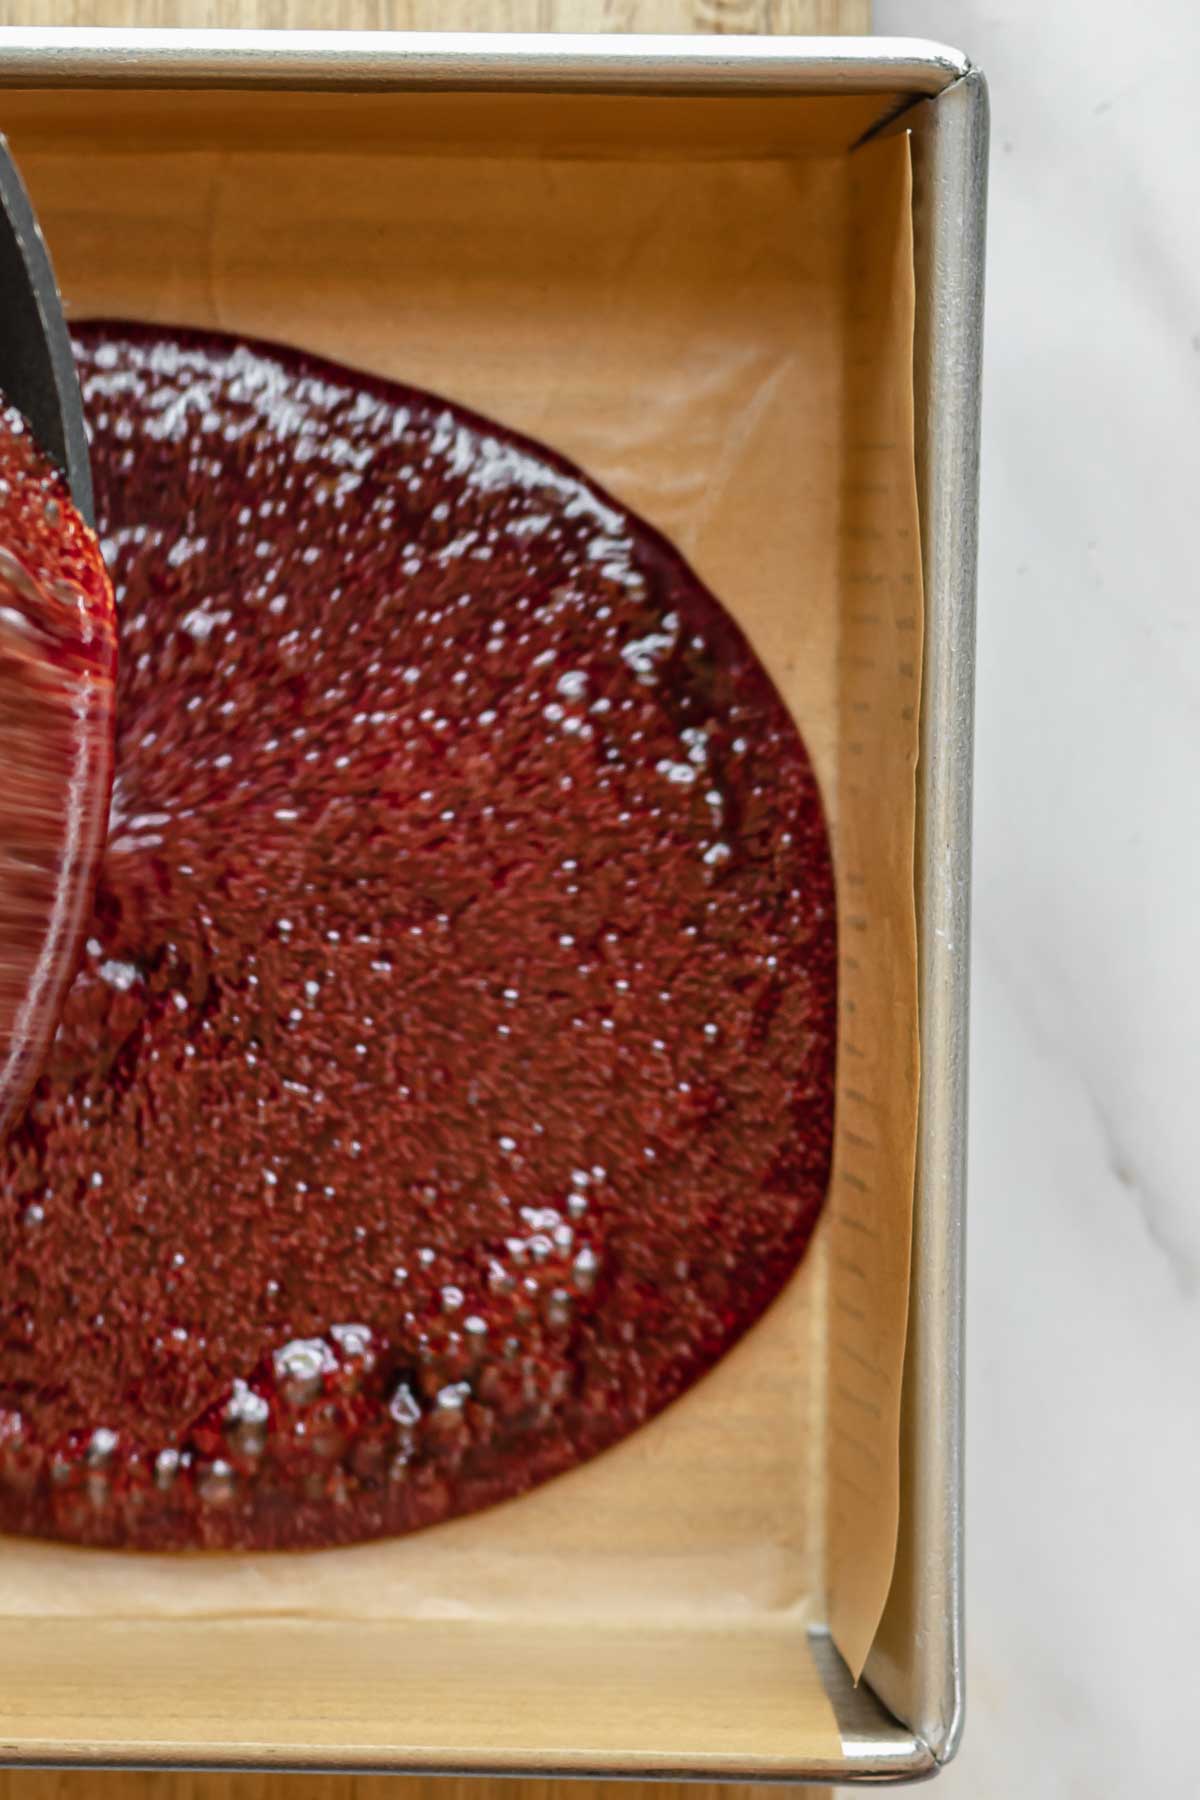 Pomegranate caramel in liquid form being poured into a prepared pan.